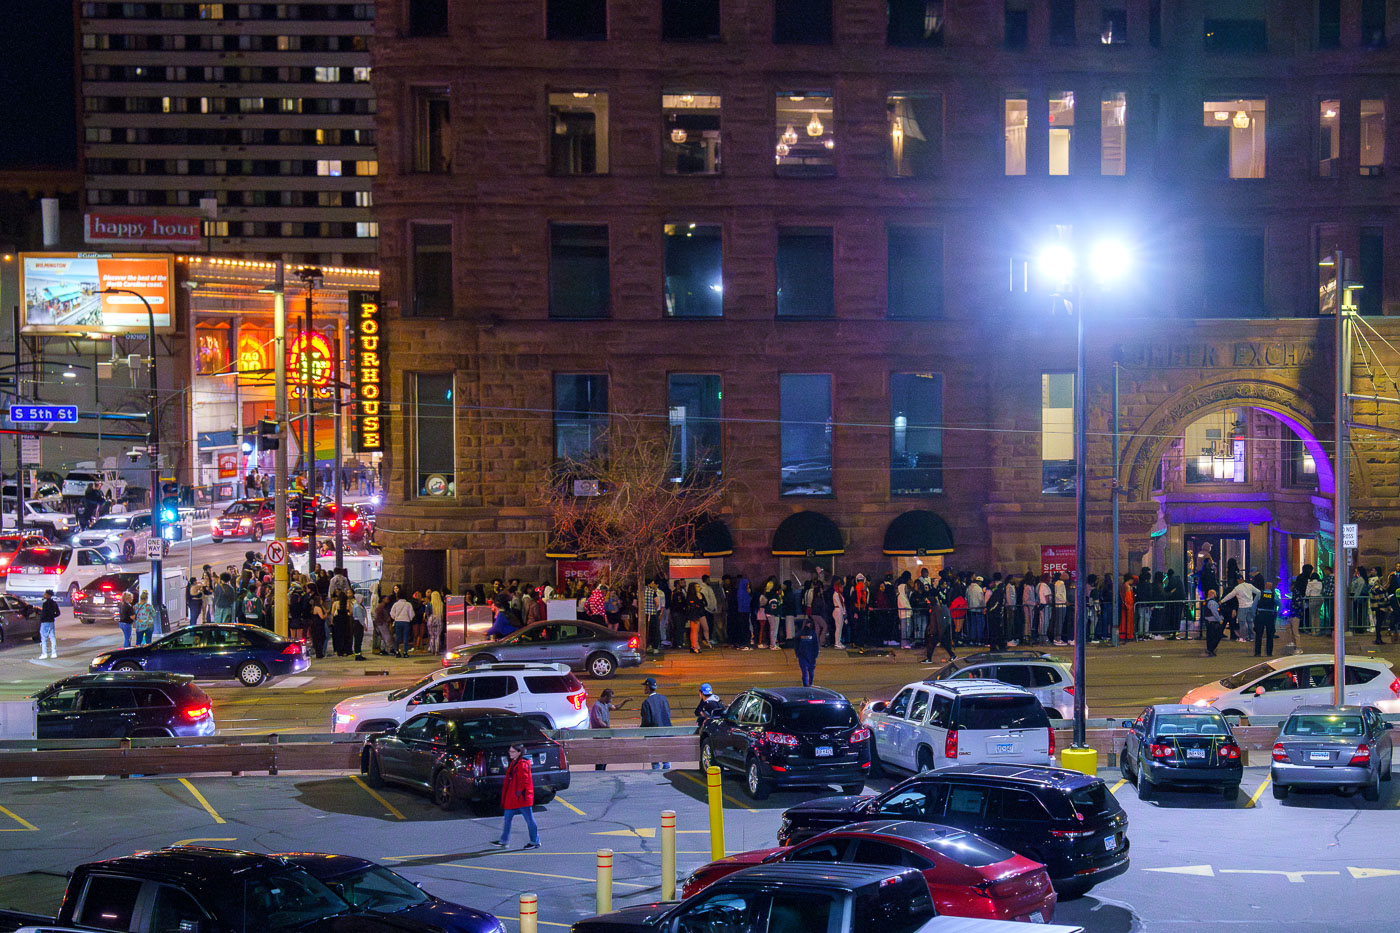 Long line at Pourhouse nightclub in Minneapolis